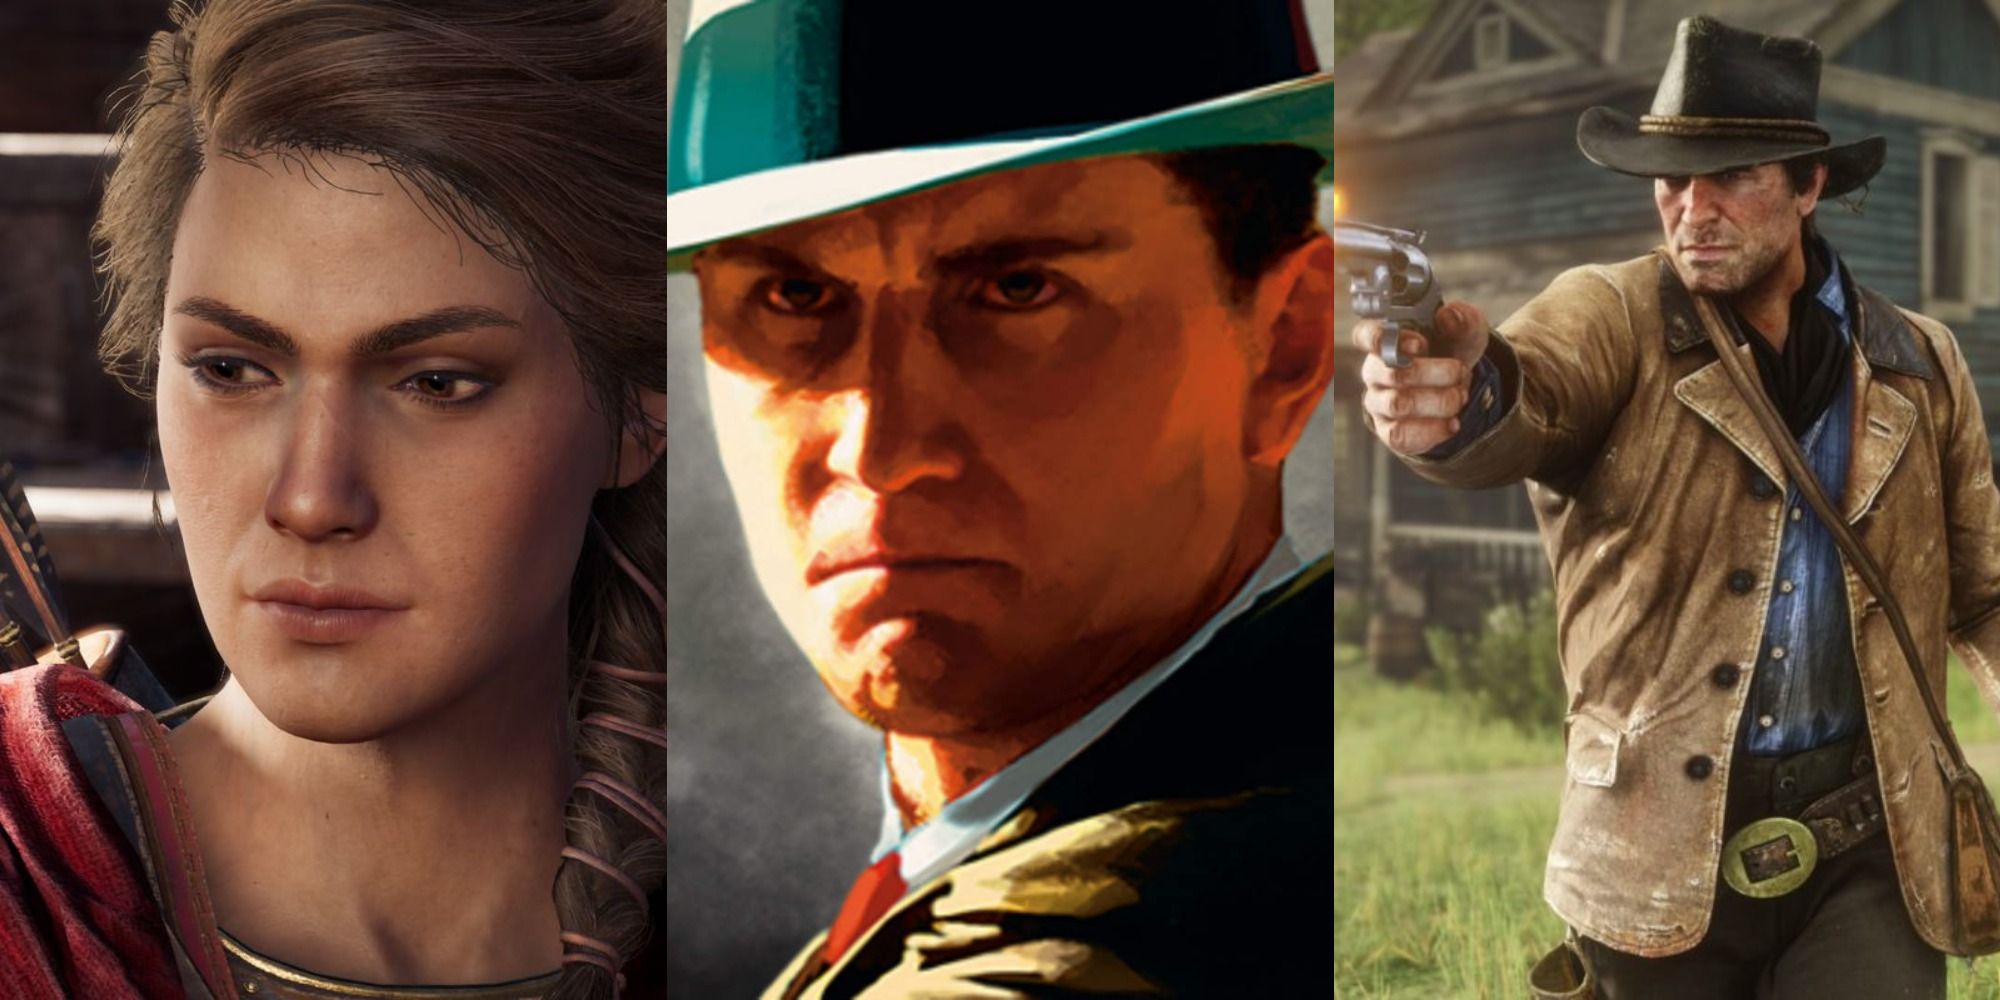 Split image of Red Dead Redemption 2 , LA Noire, and Kassandra from Assassin's Creed Odyssey.